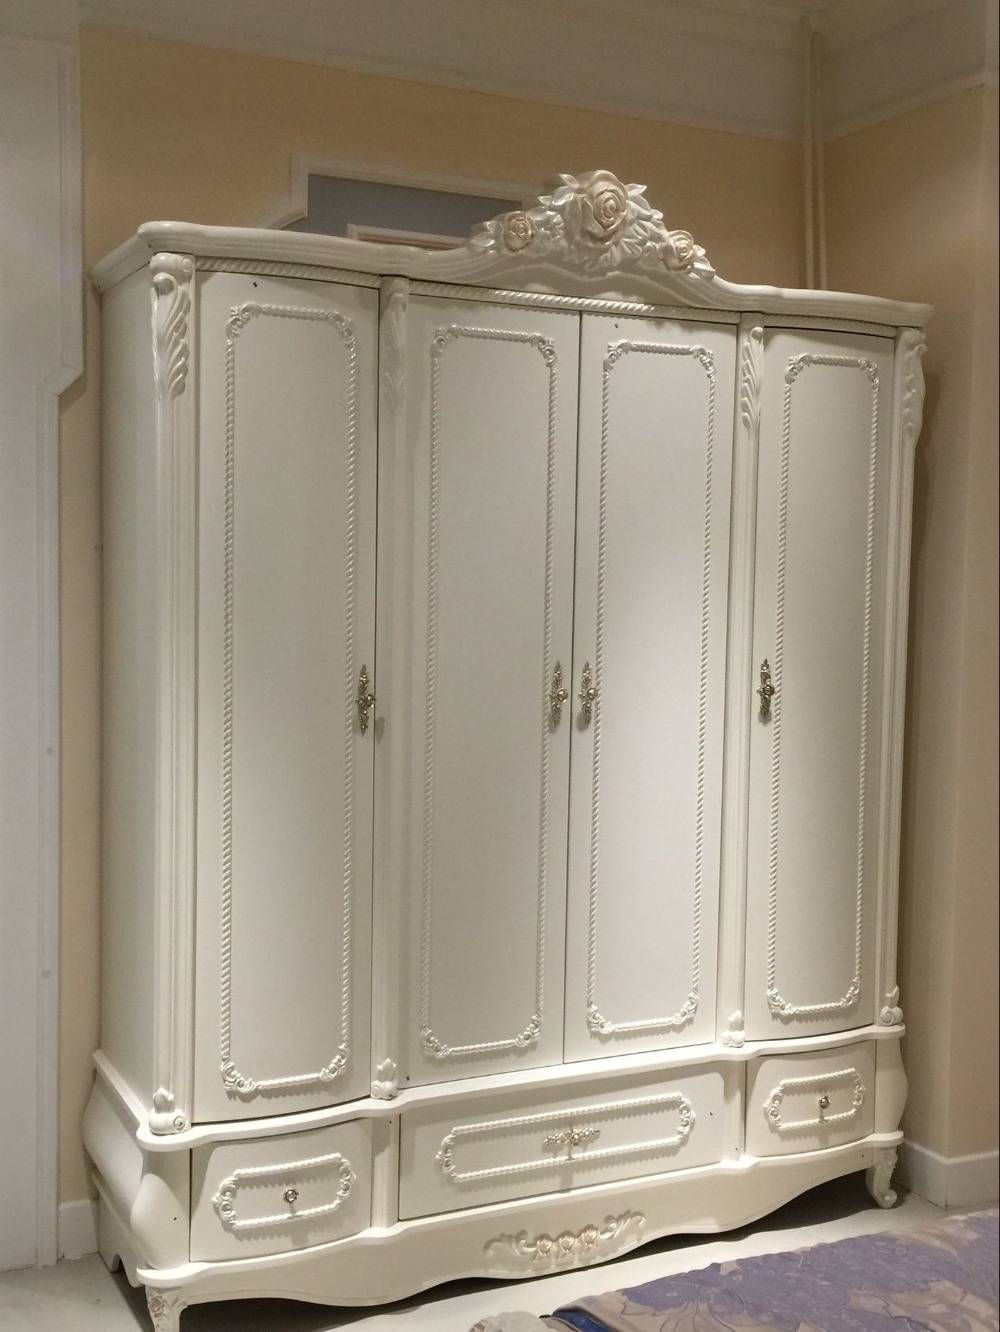 Compare Prices On French Wardrobe  Online Shopping/buy Low Price Throughout French Wardrobes (View 8 of 15)